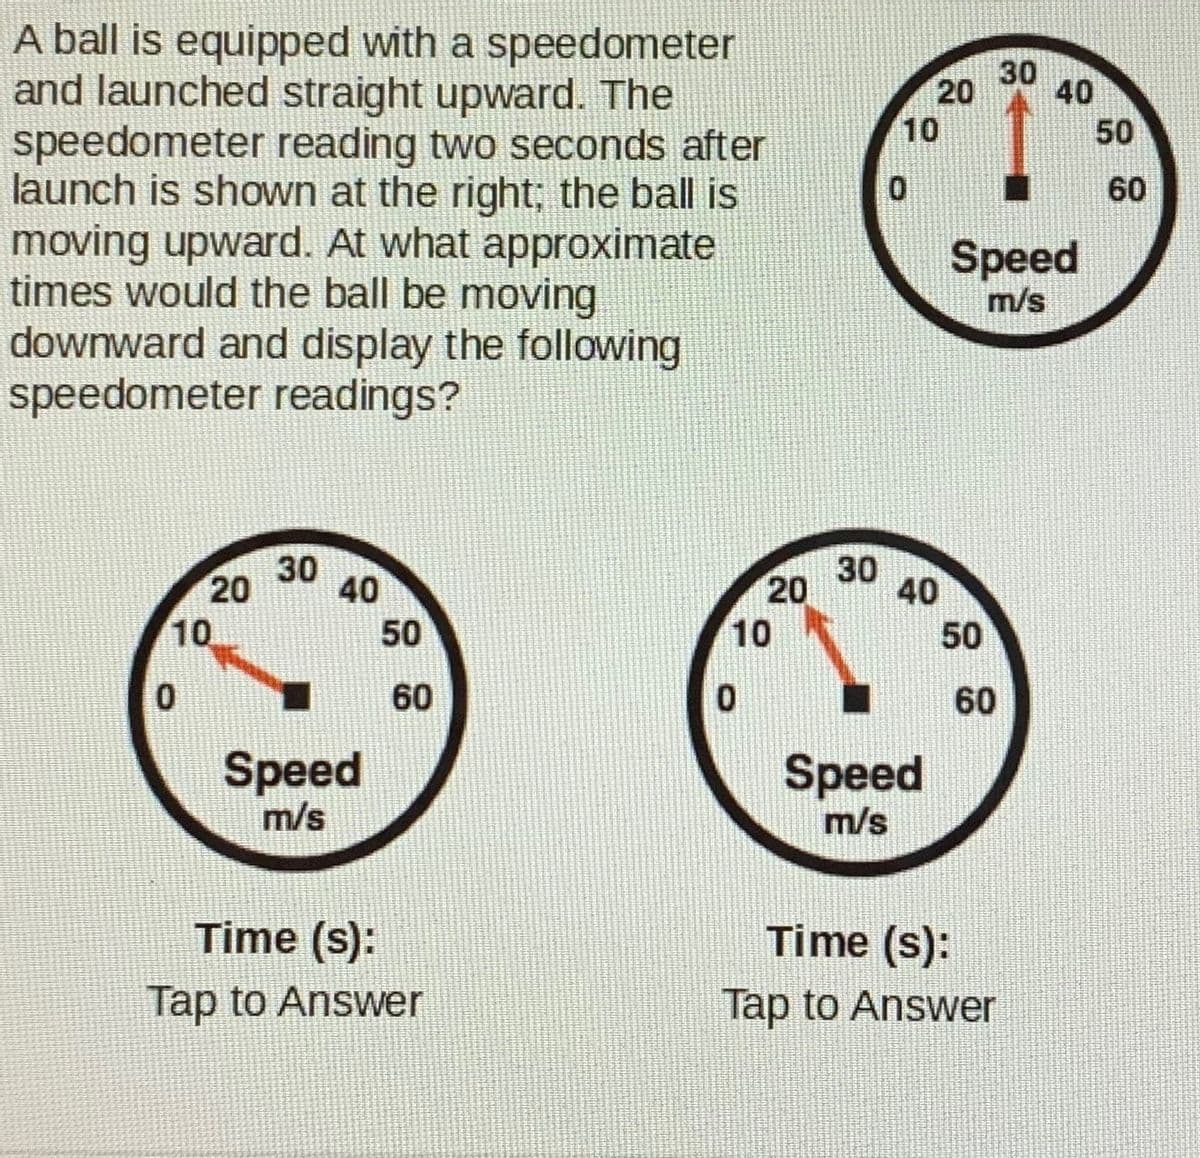 A ball is equipped with a speedometer
and launched straight upward. The
speedometer reading two seconds after
launch is shown at the right; the ball is
moving upward. At what approximate
times would the ball be moving
downward and display the following
speedometer readings?
30
20
40
10
50
60
Speed
m/s
30
40
30
20
10
20
40
10
50
50
60
60
Speed
m/s
Speed
m/s
Time (s):
Time (s):
Tap to Answer
Tap to Answer
